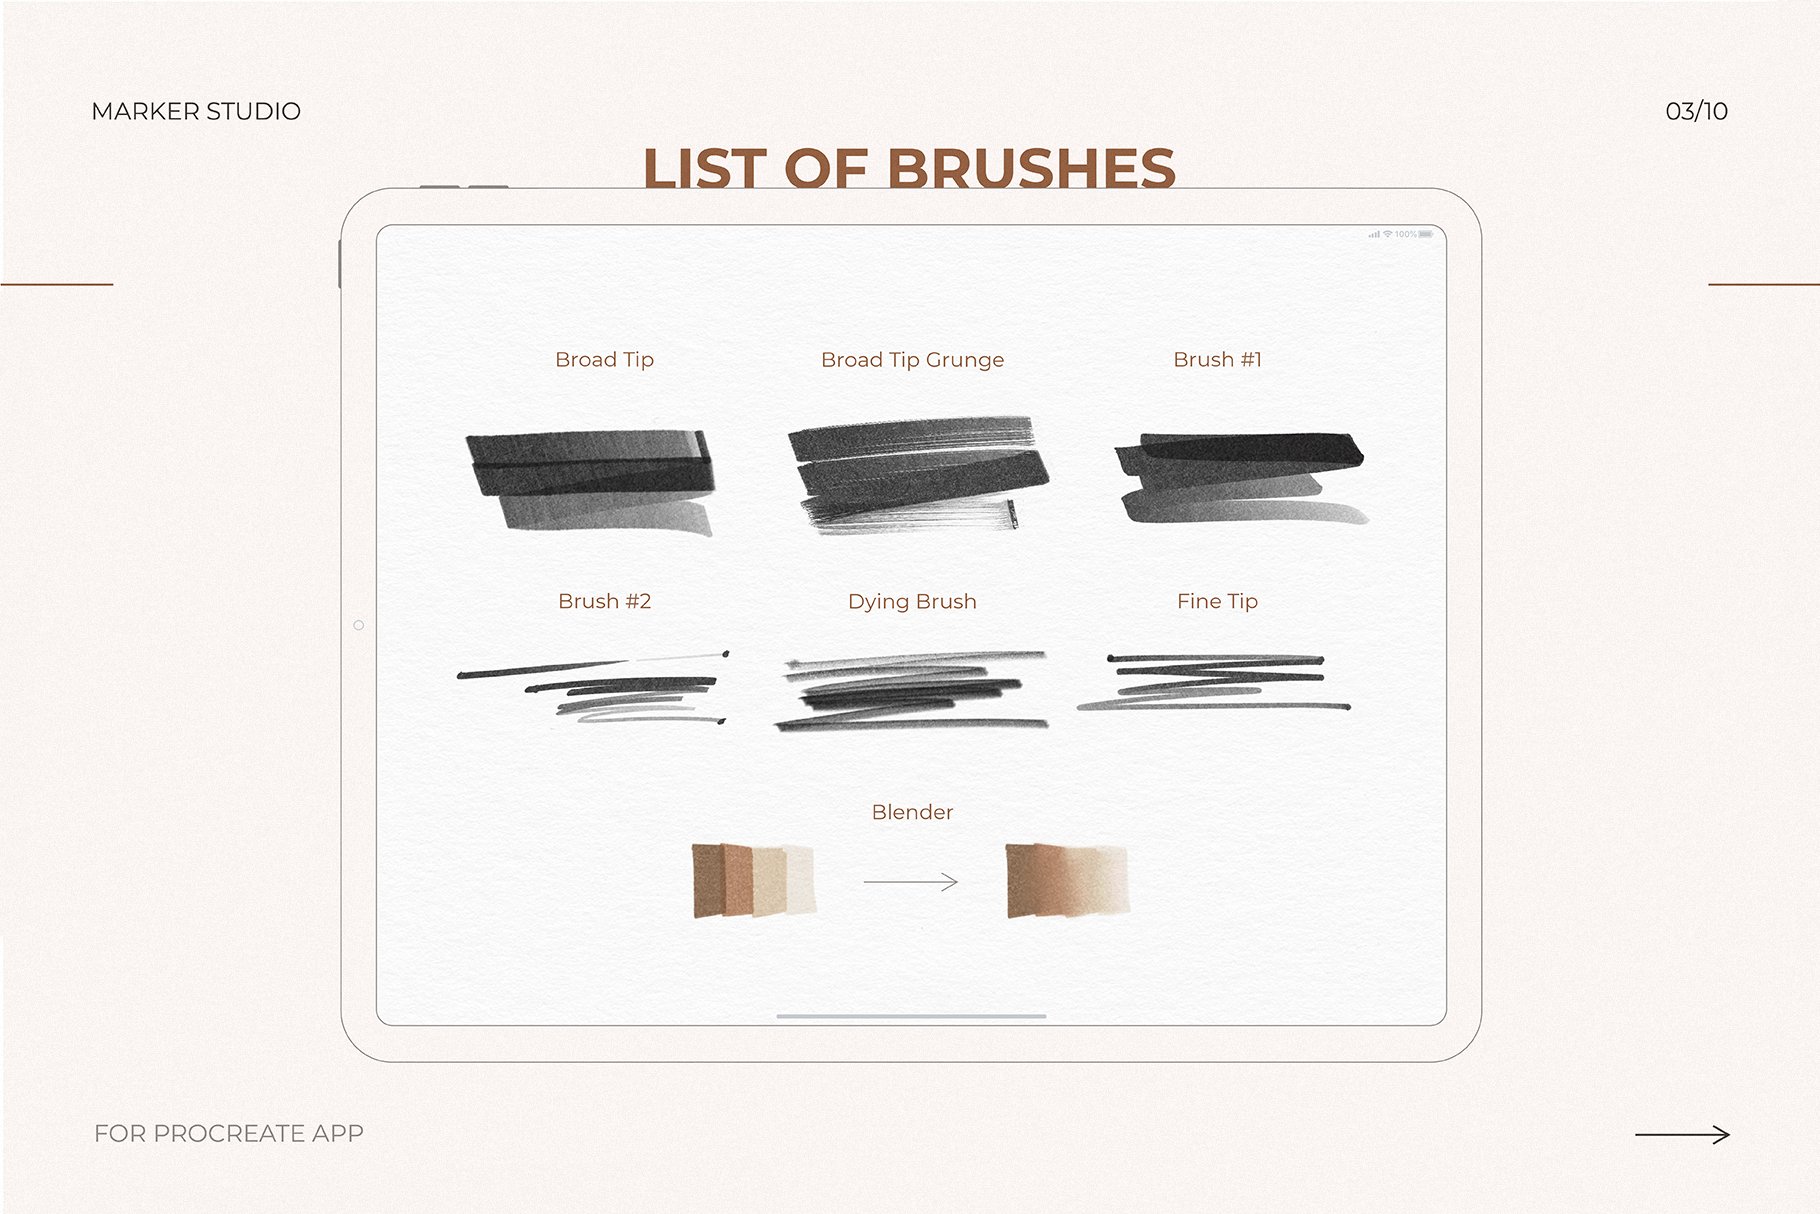 List of brushes.